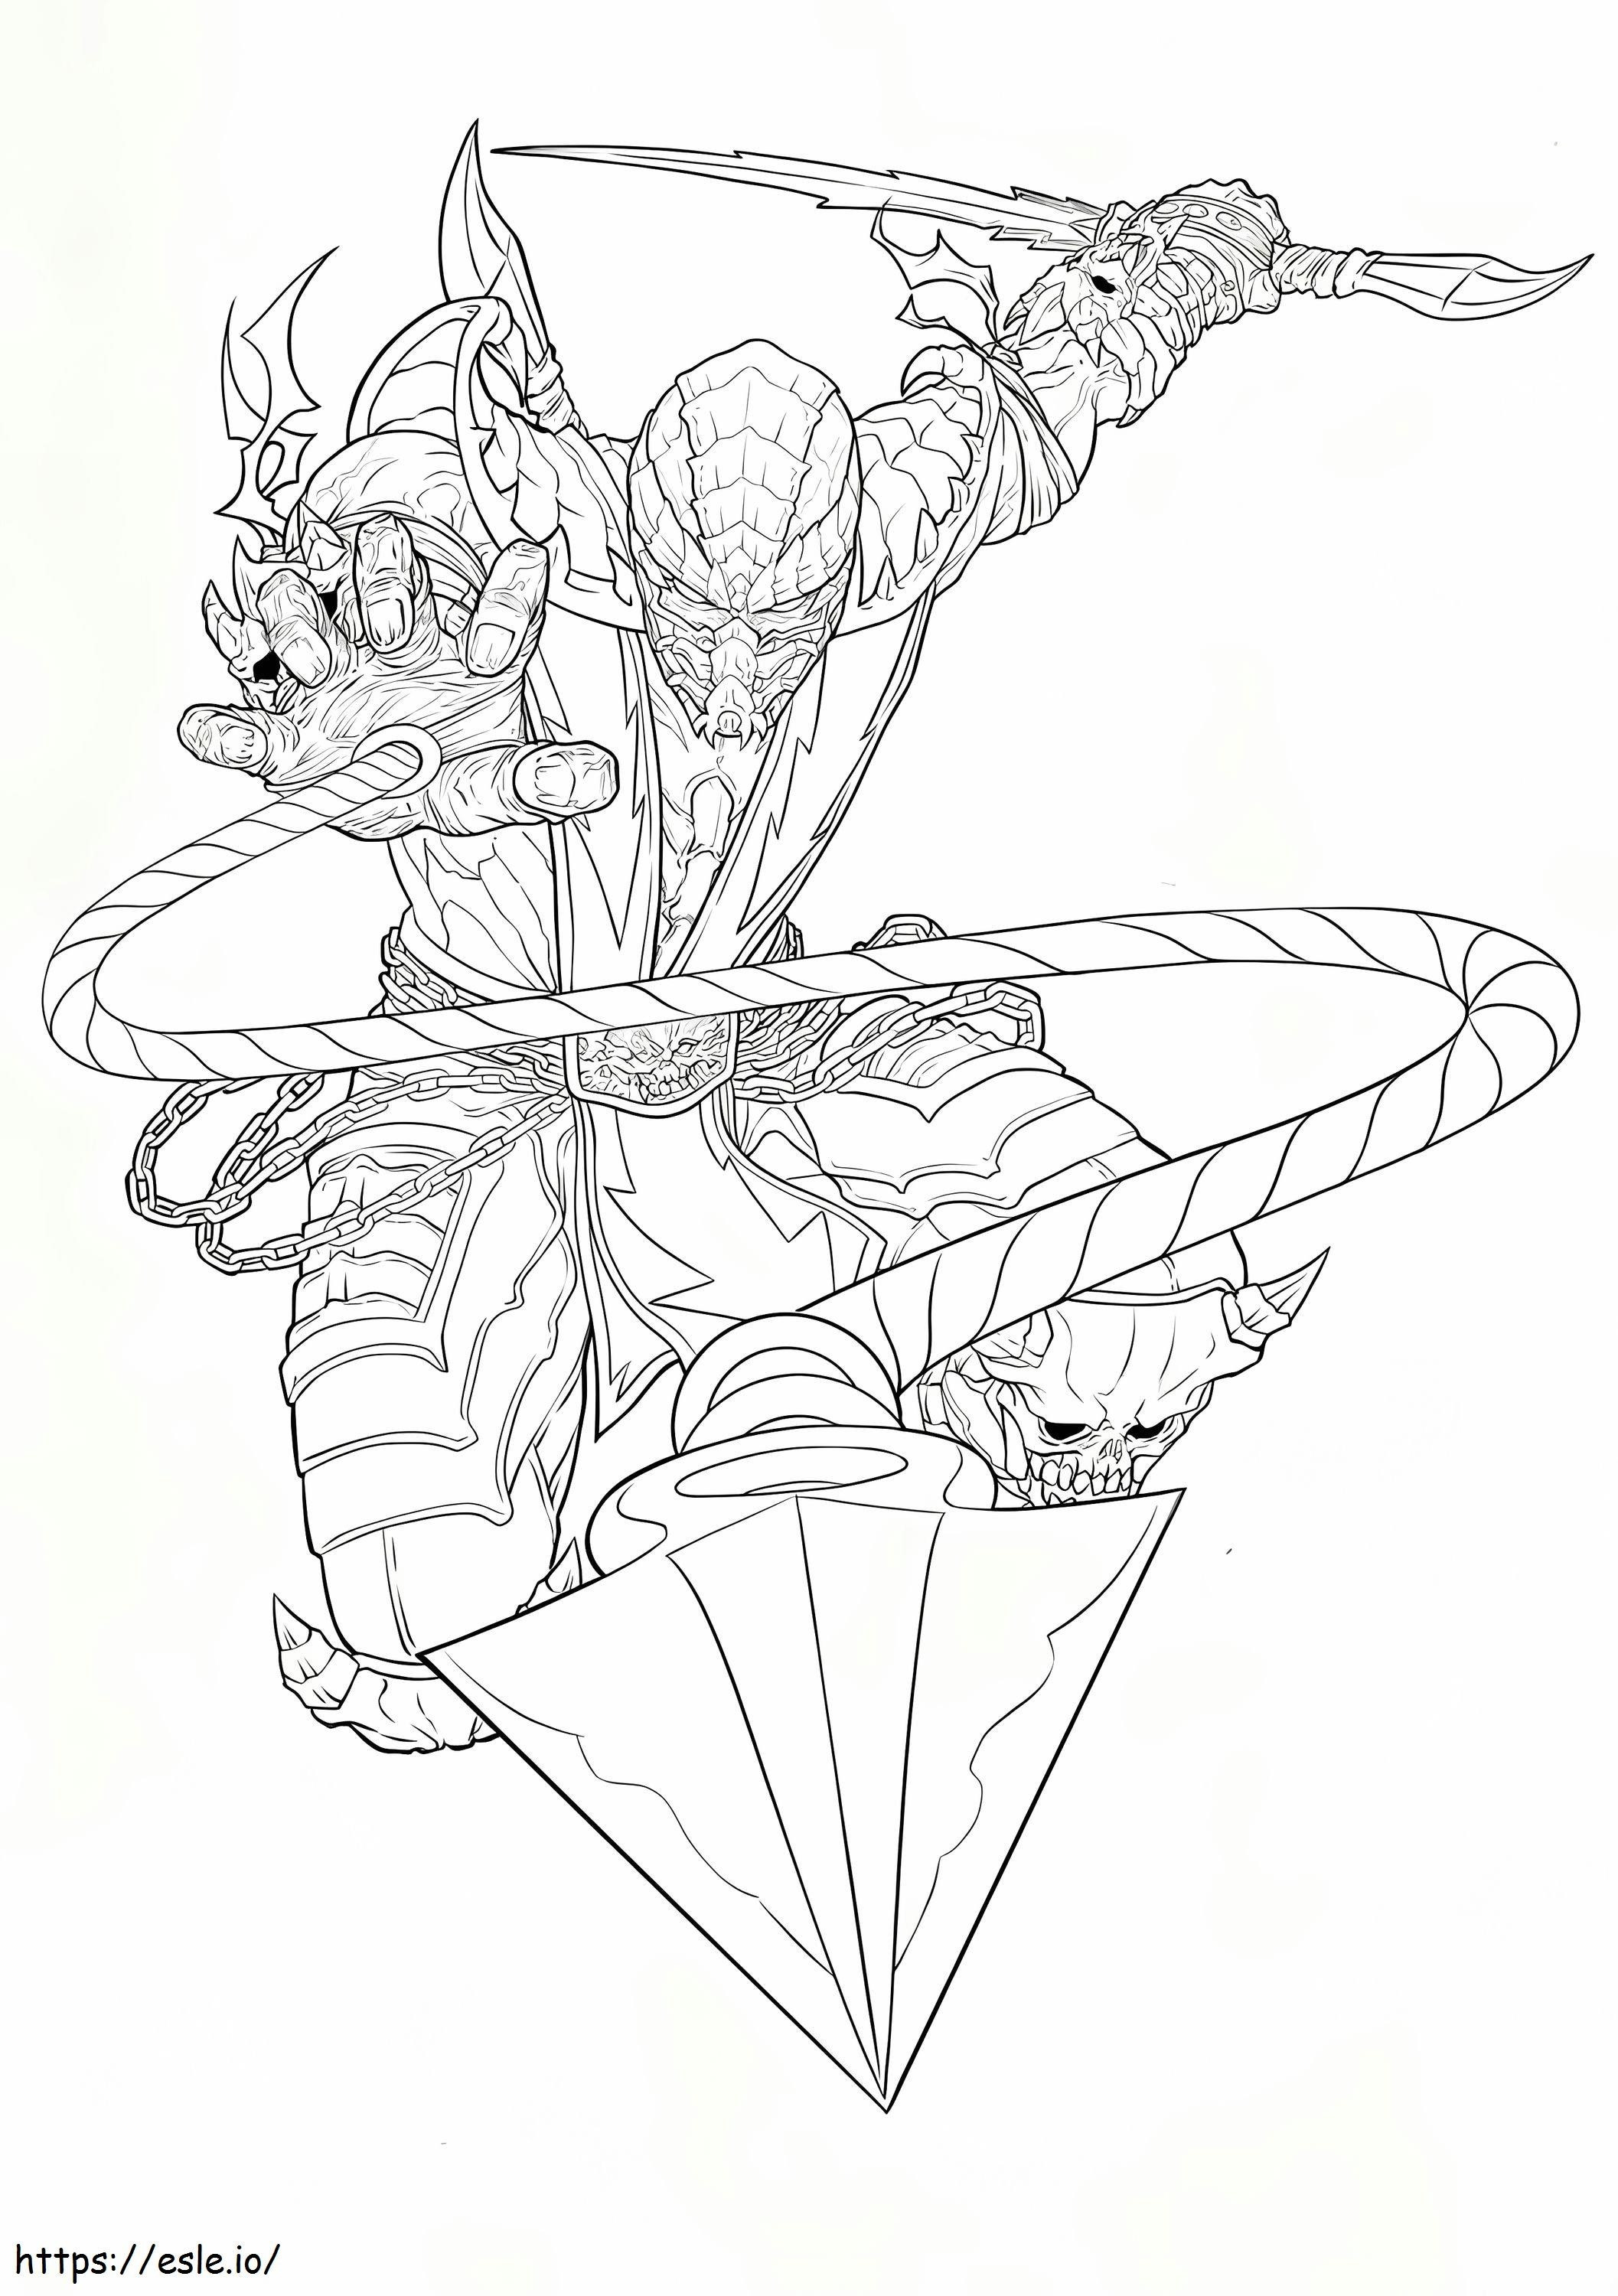 Amazing Scorpion coloring page